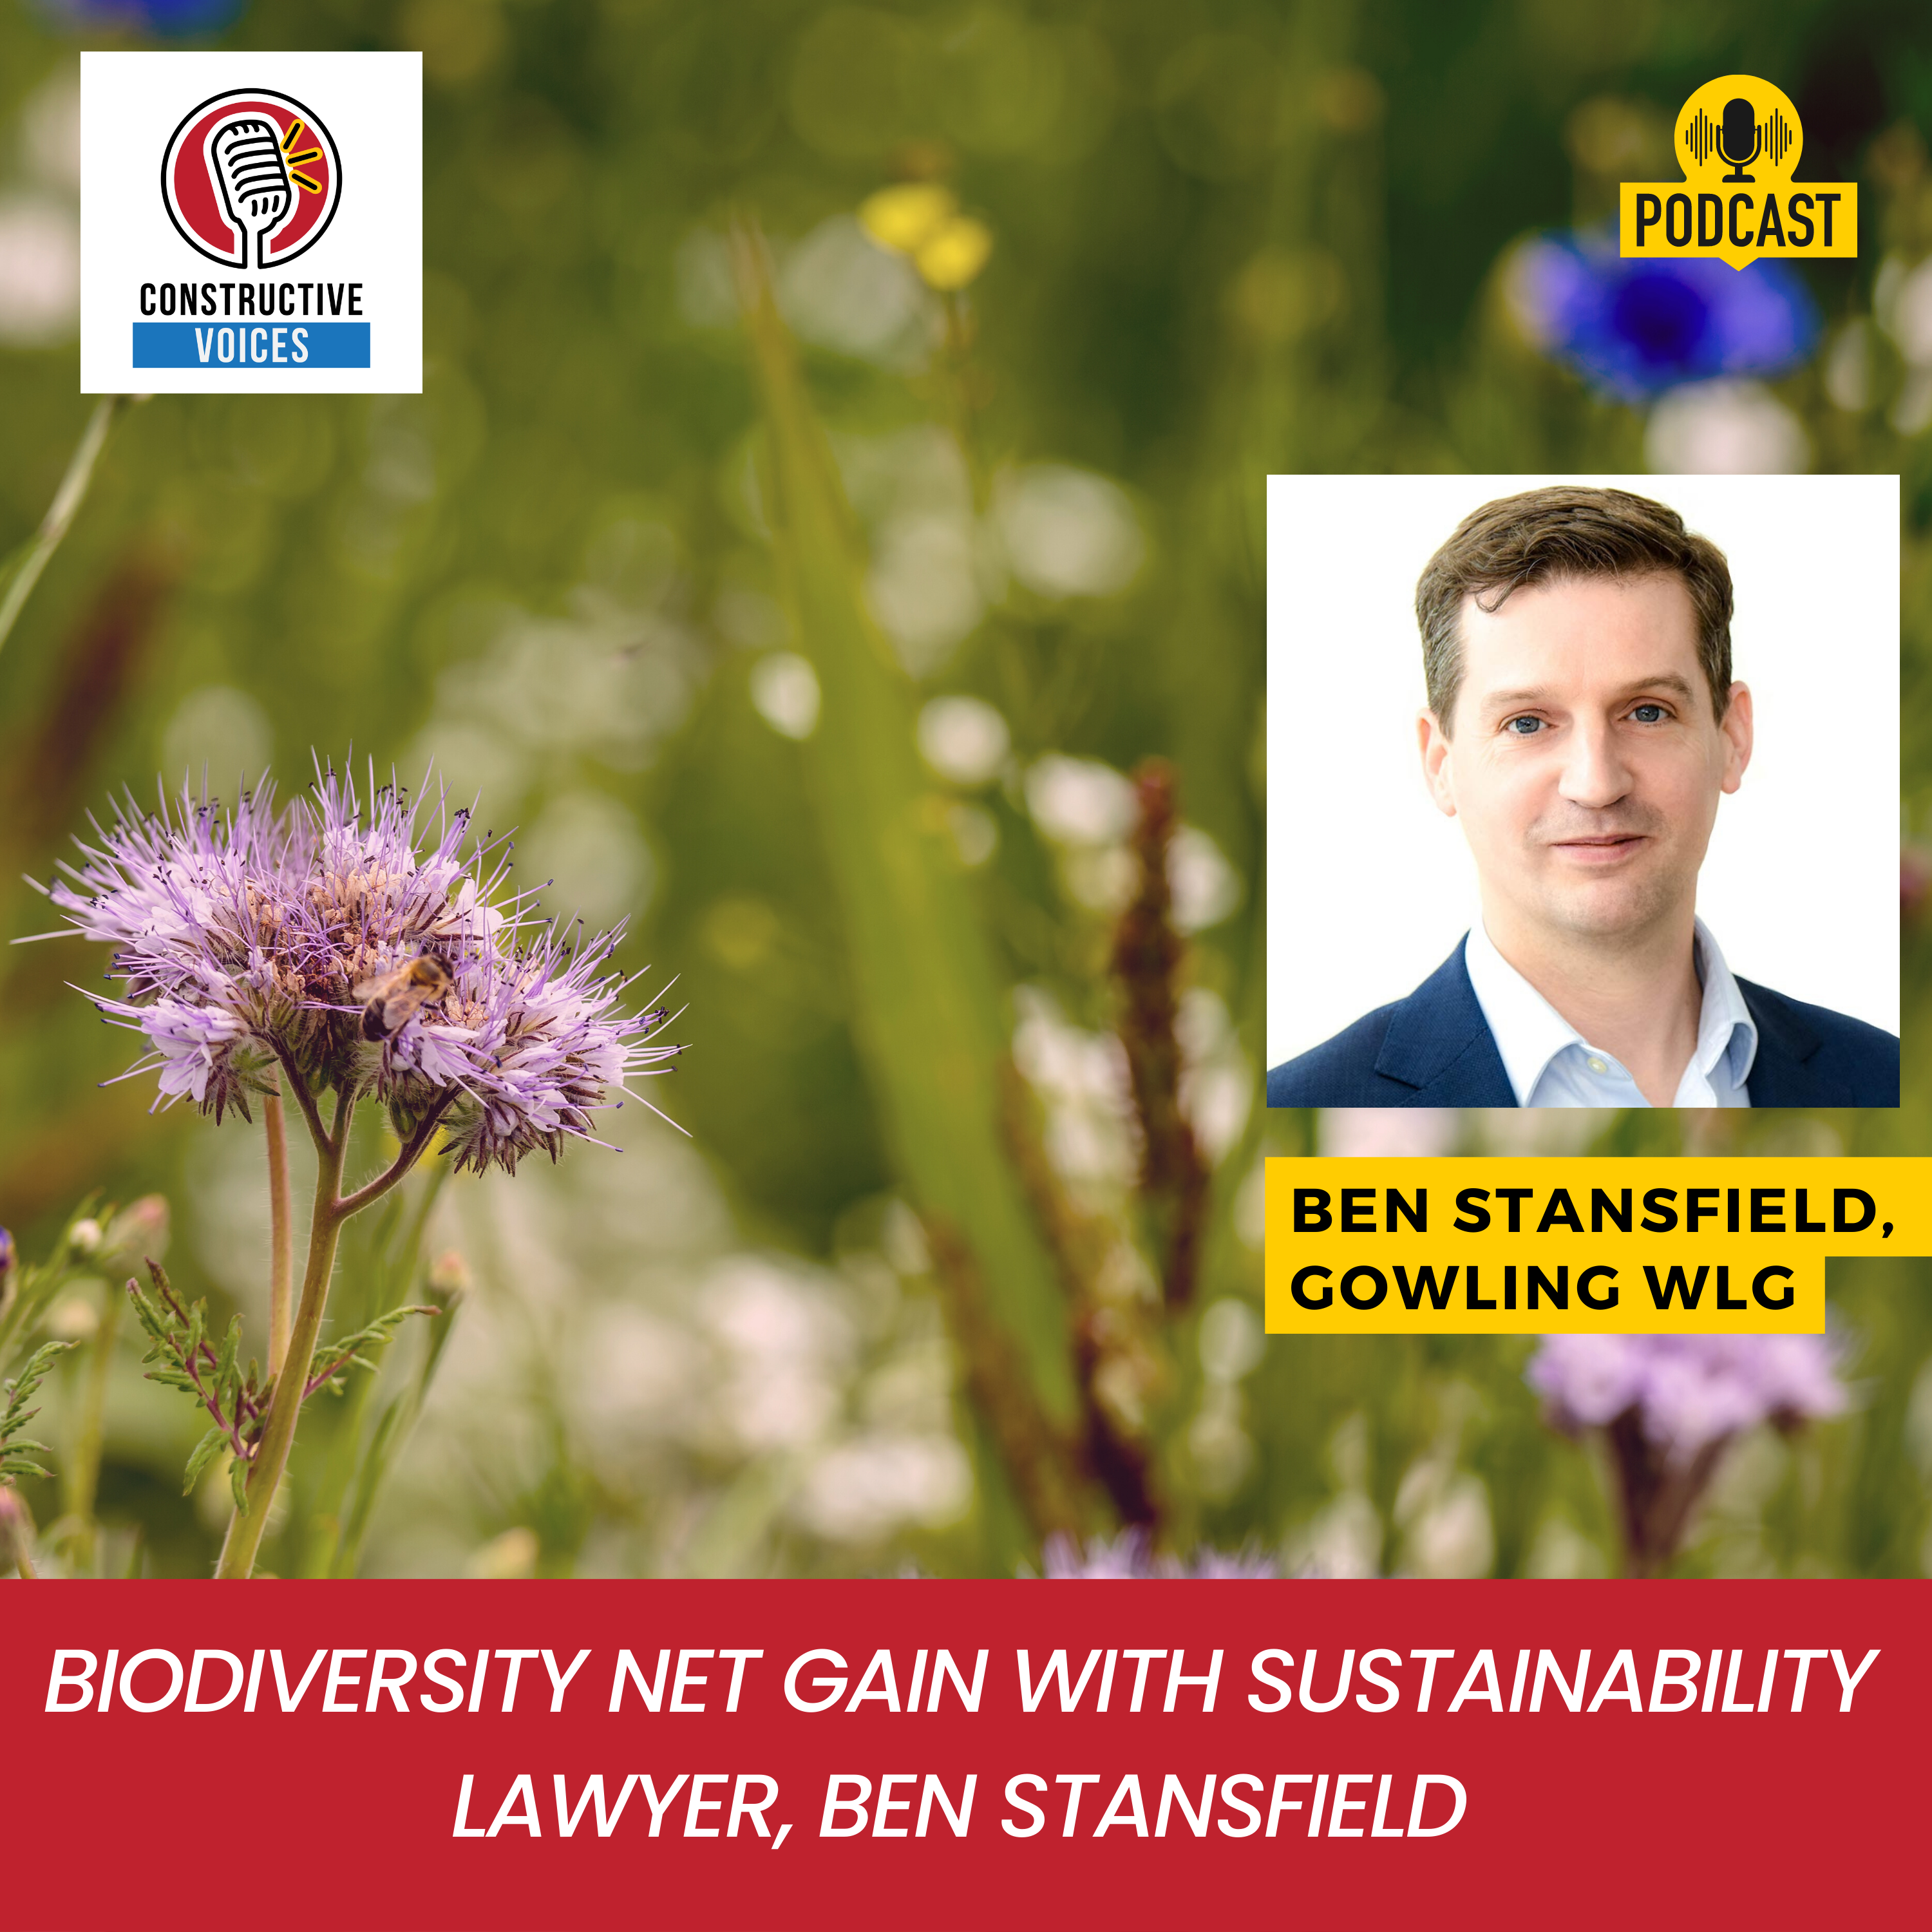 Biodiversity Net Gain With Sustainability Lawyer, Ben Stansfield